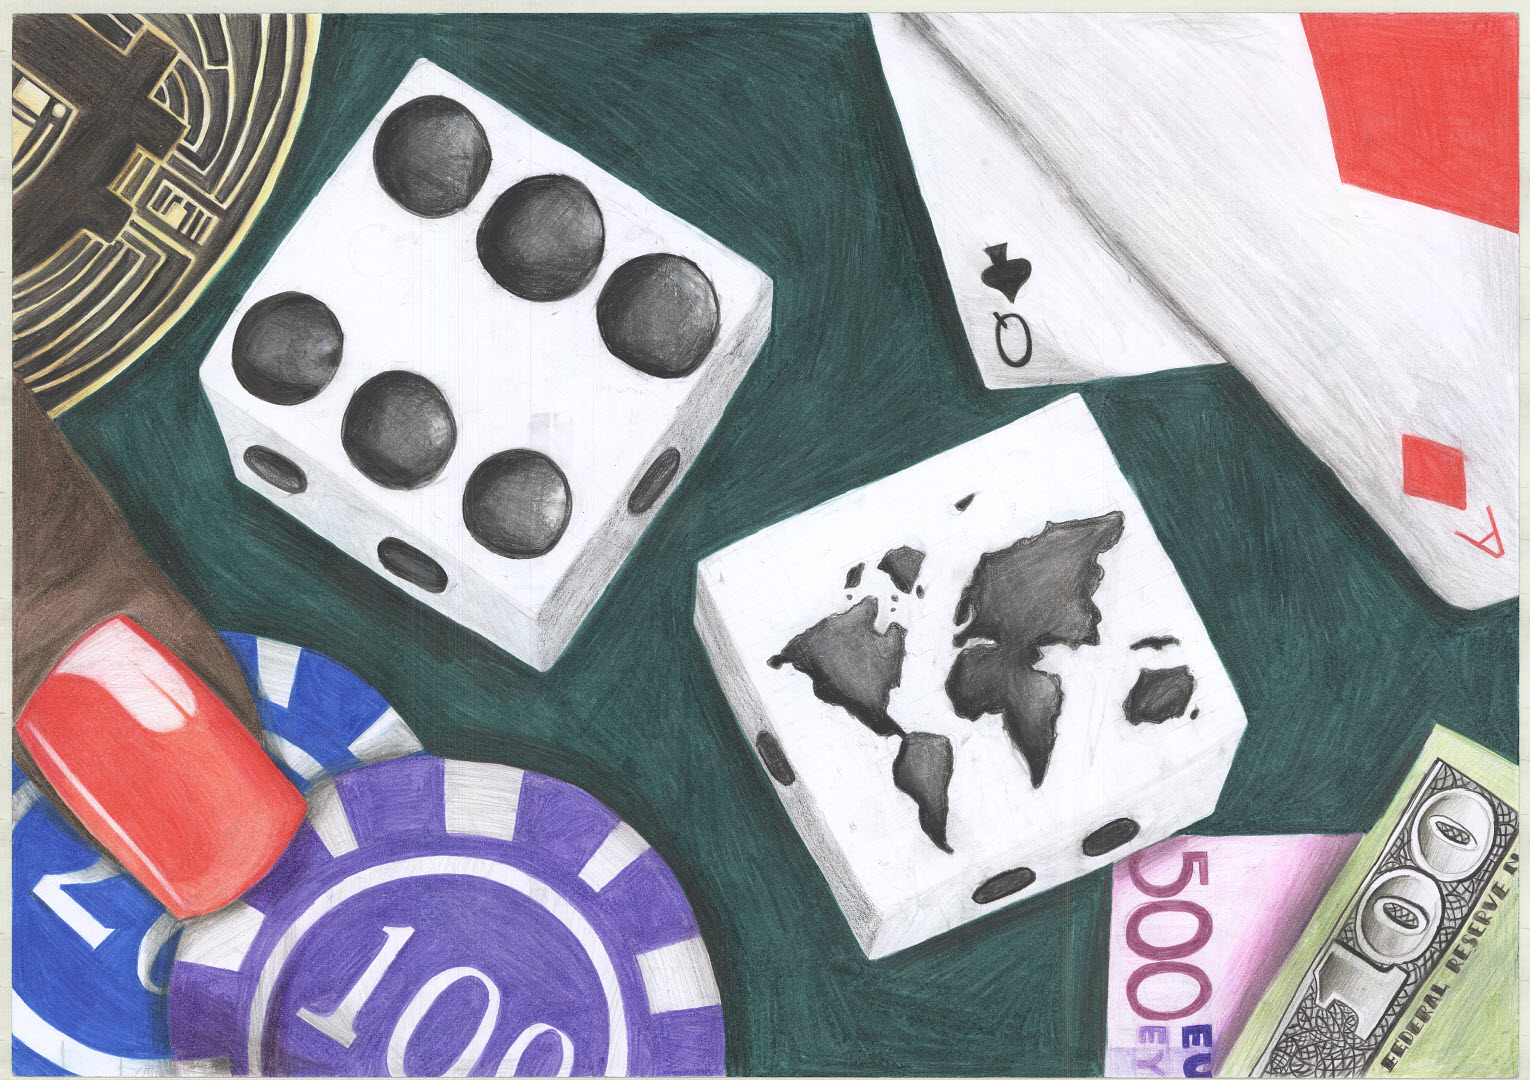 Shows dice, cards, money and the world on a dice